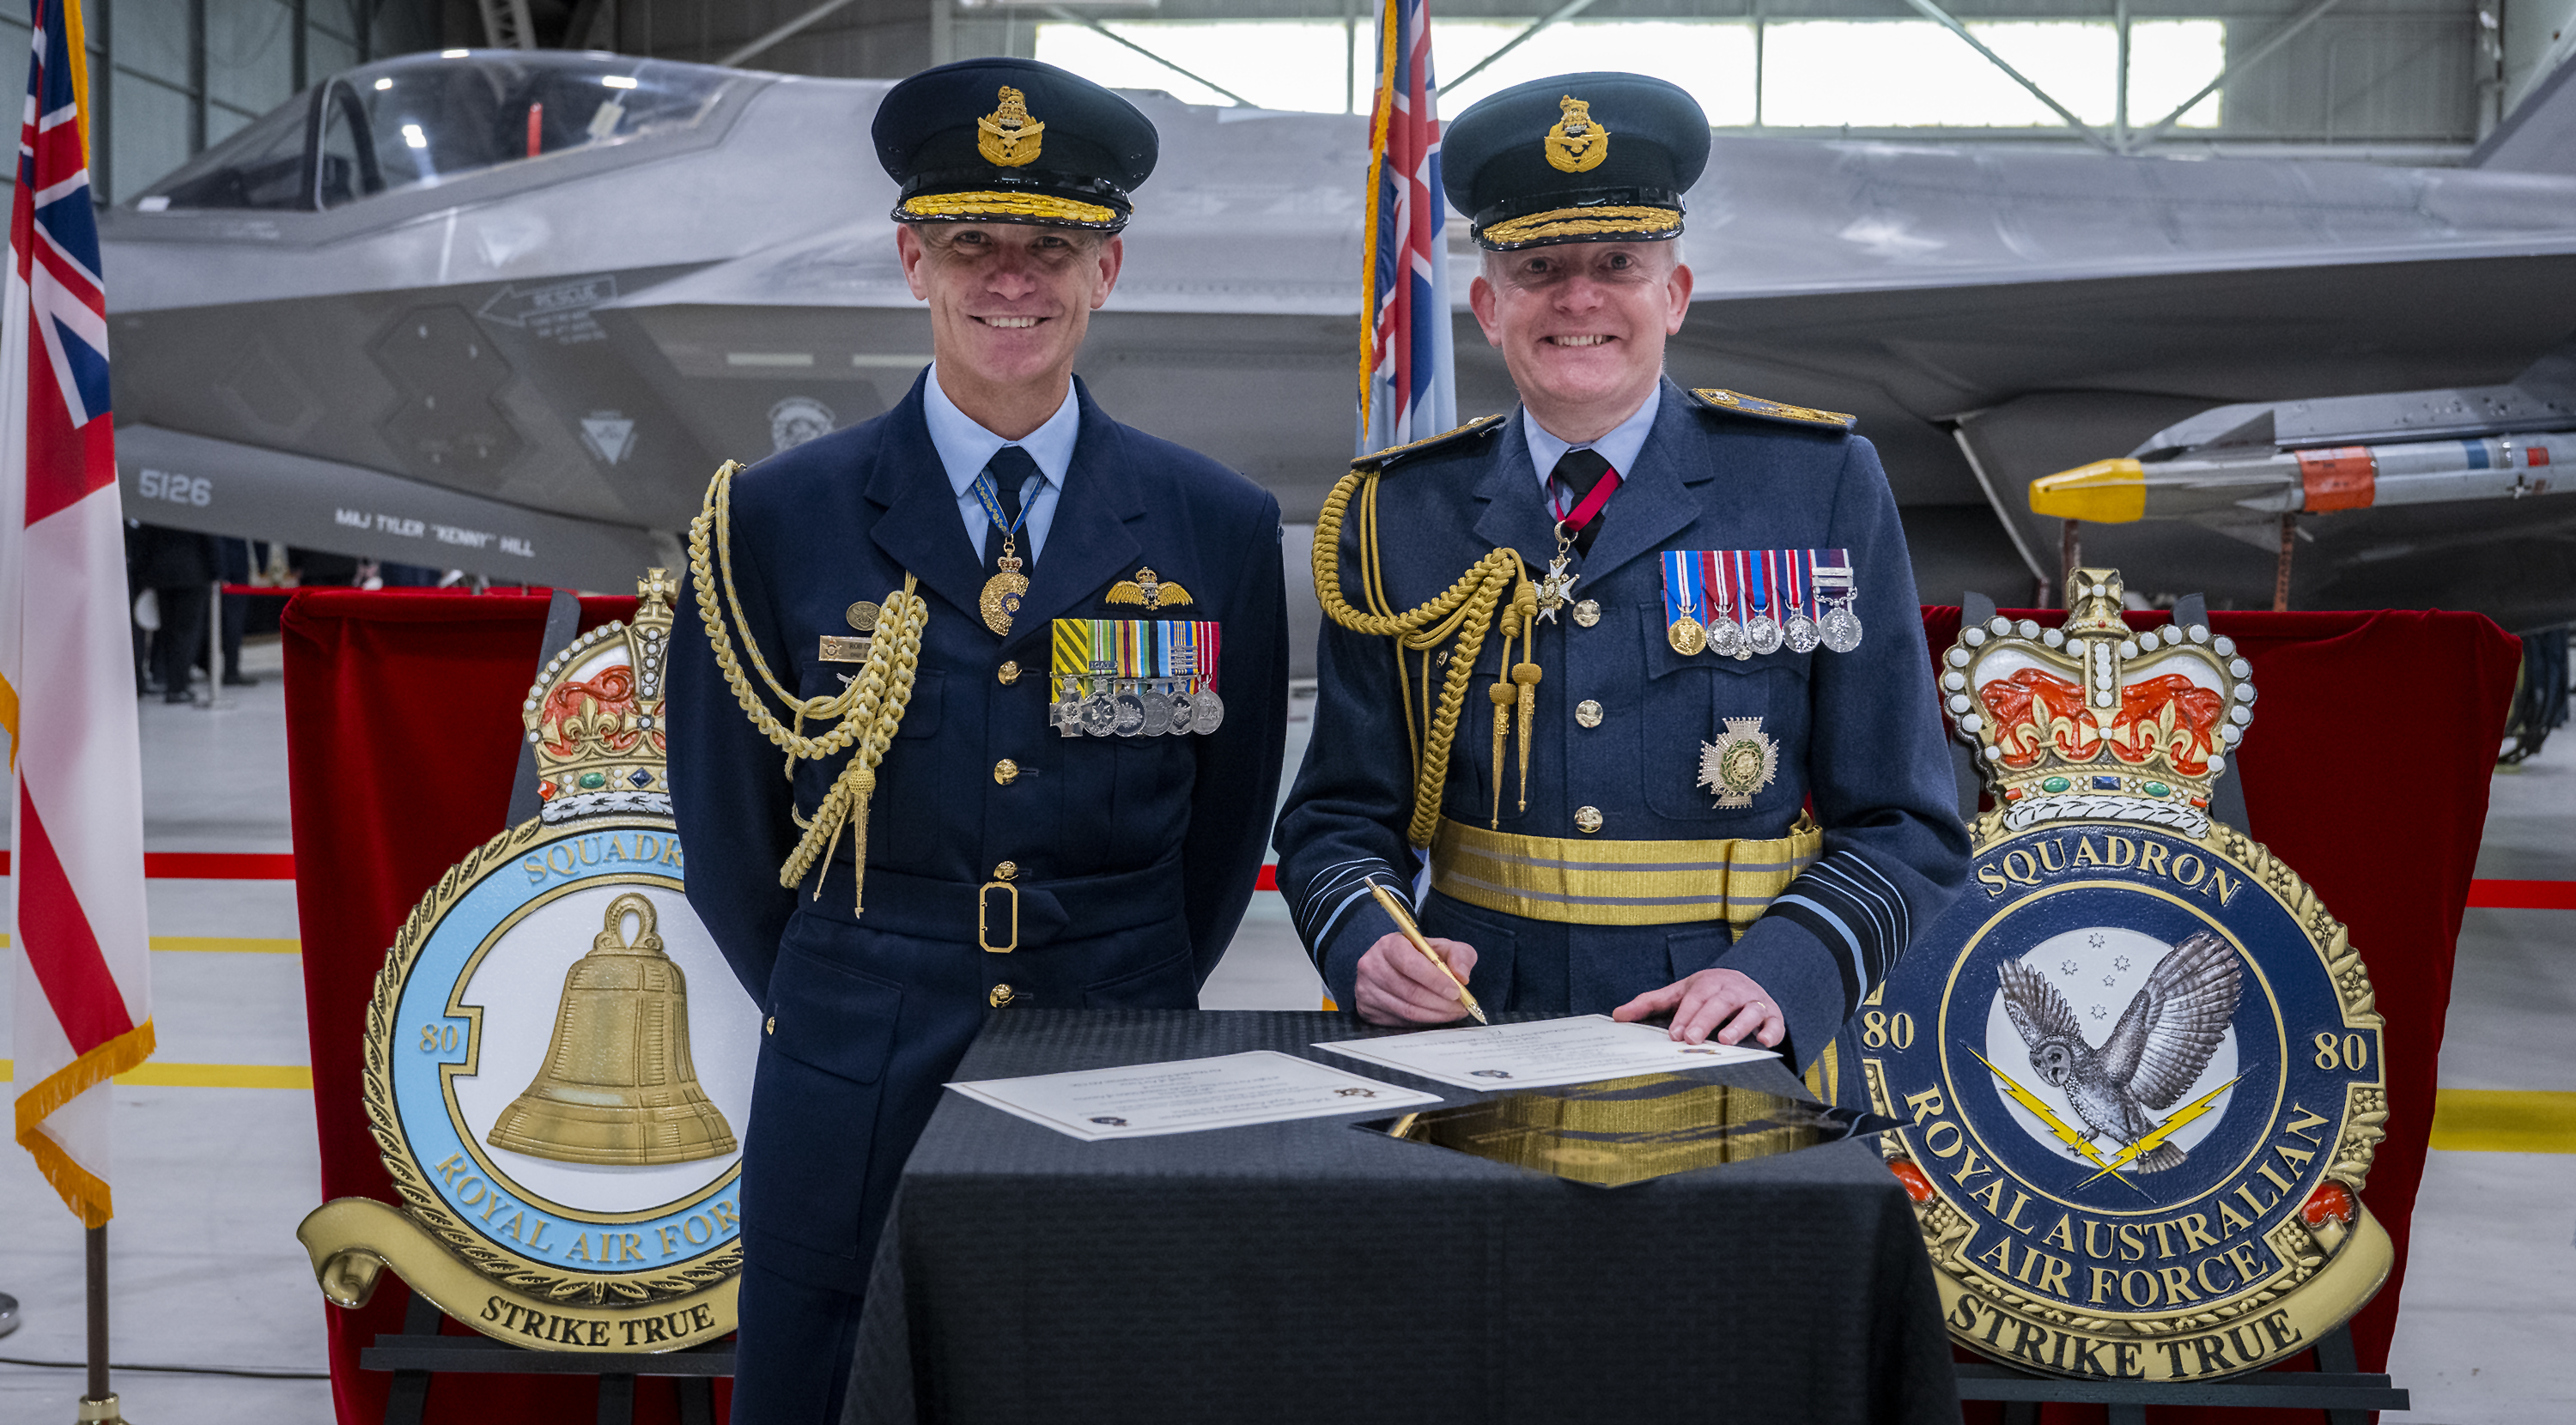 Chief of the Air Staff and Chief of the Air Force signing documents and smiling.